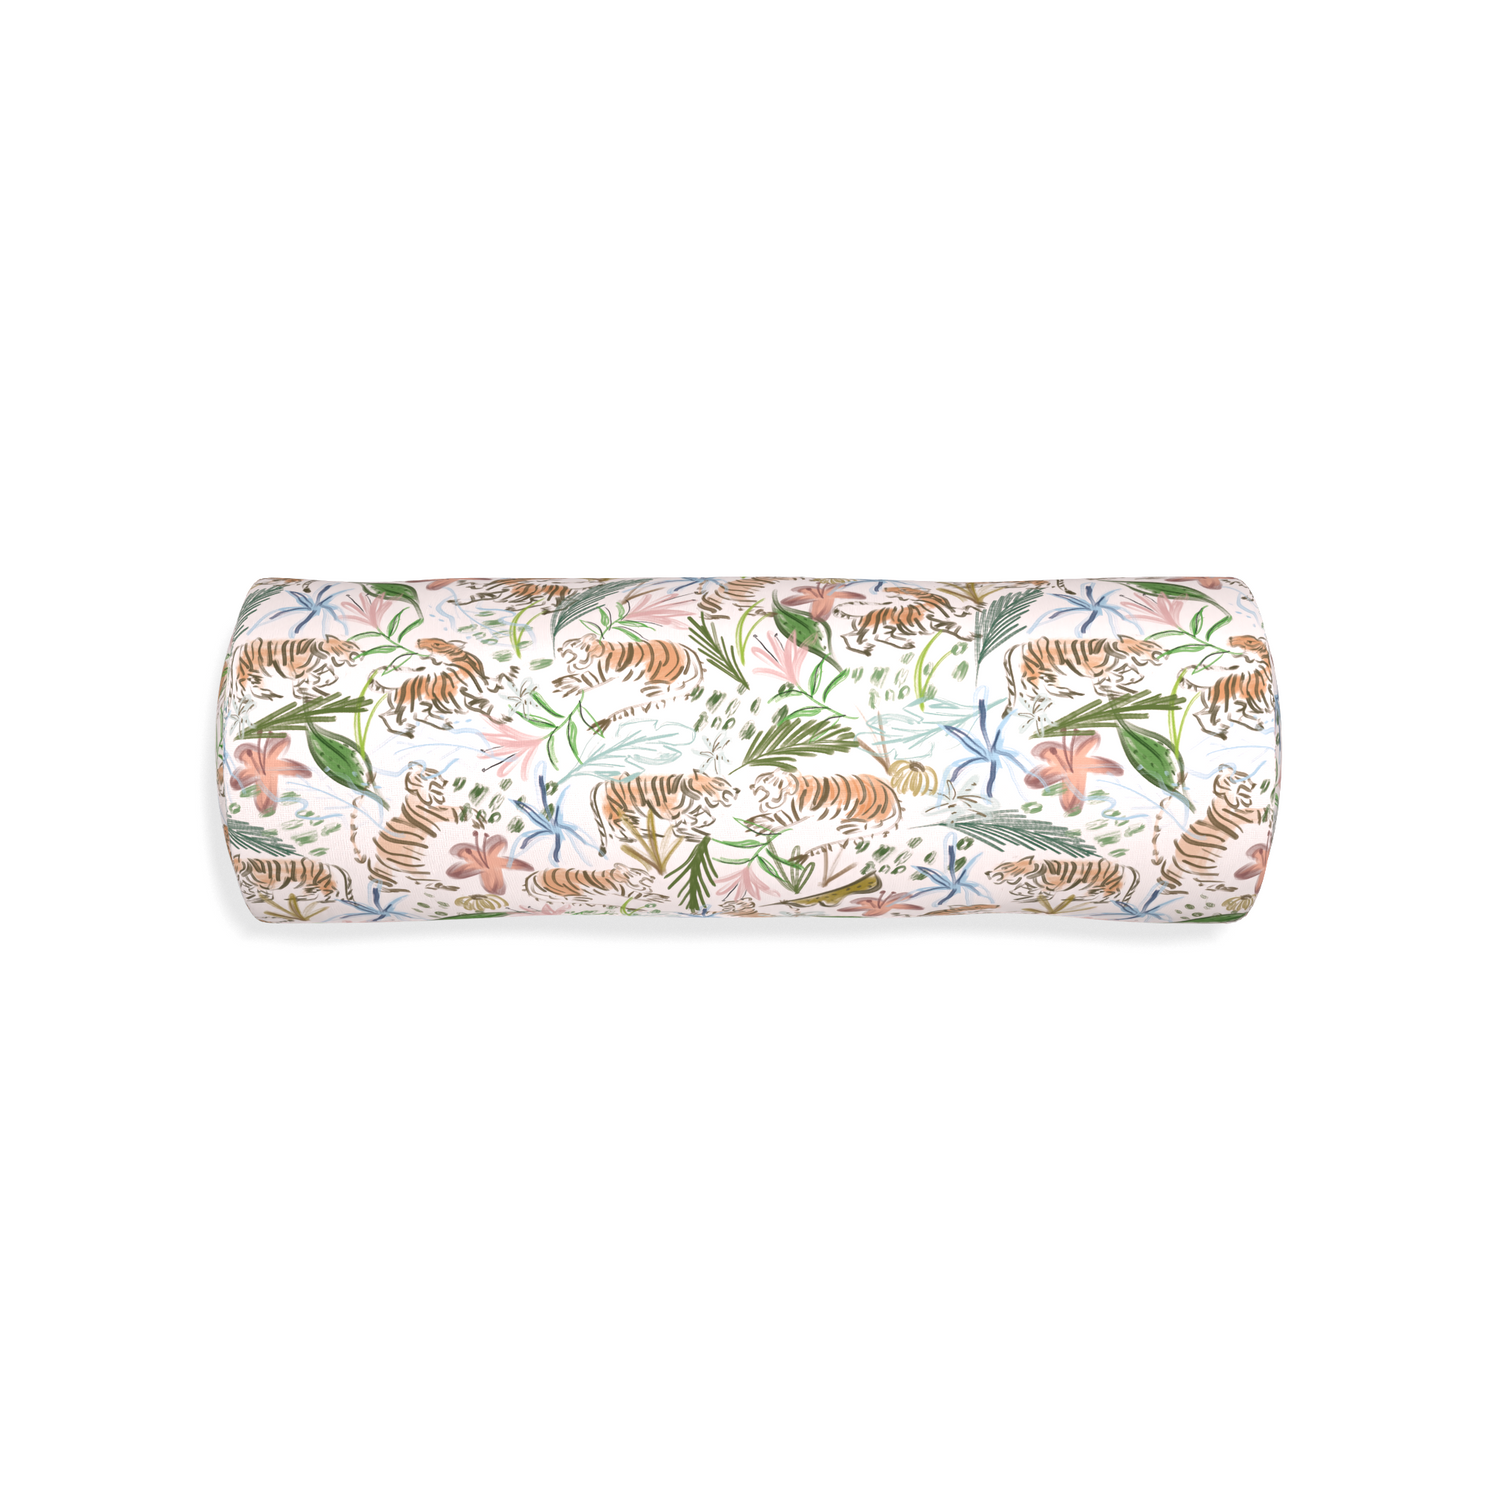 Bolster frida pink custom pillow with none on white background